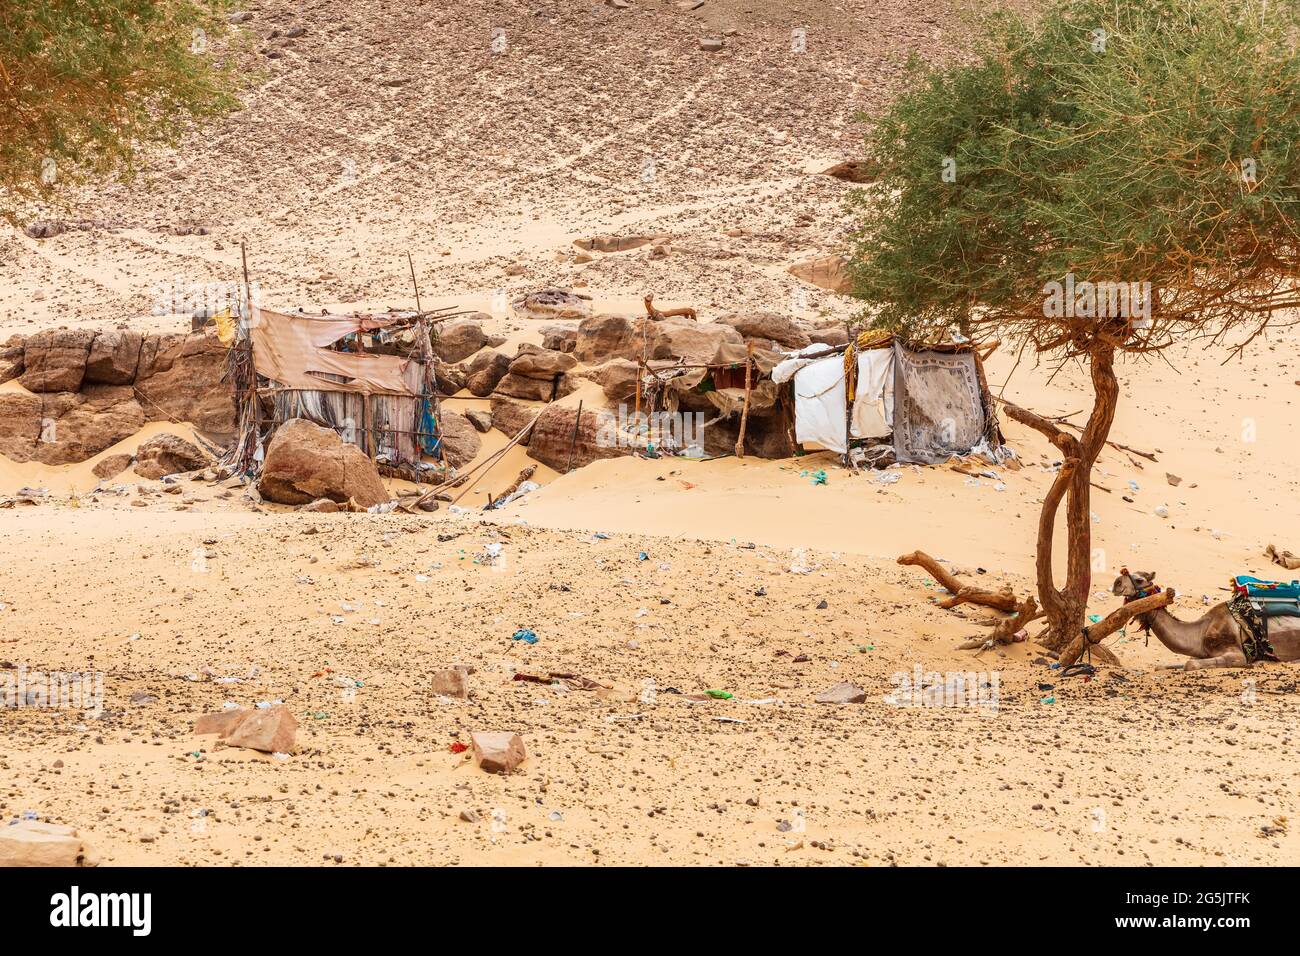 Typical bedouin's tents in the desert of Africa, Egypt Stock Photo